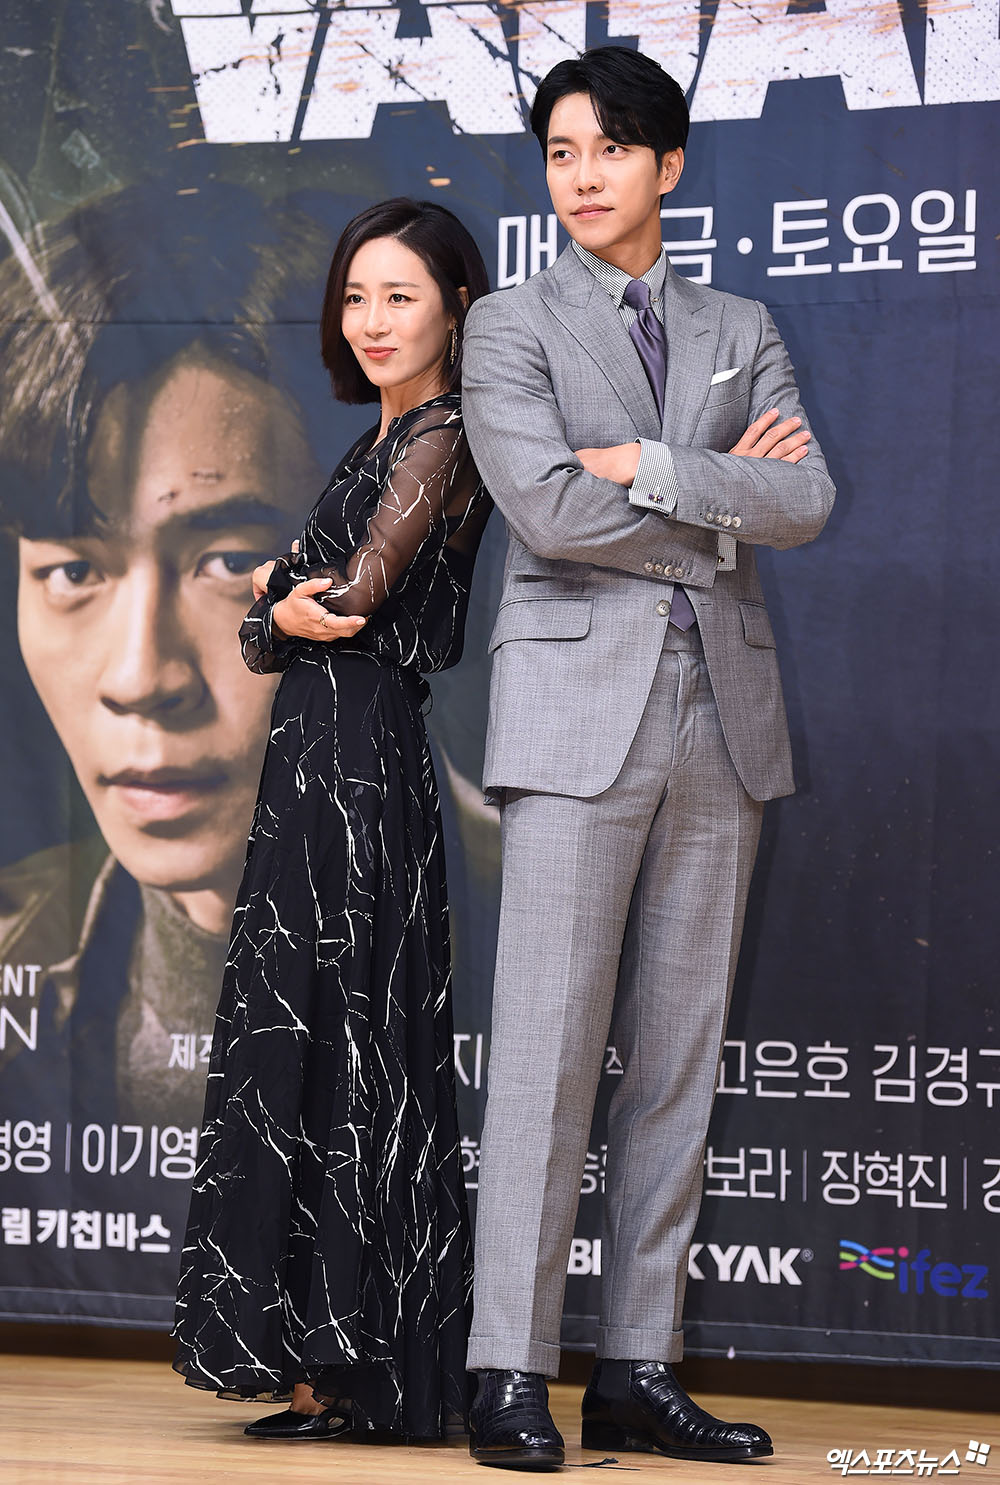 Actor Moon Jin-hee and Lee Seung-gi, who attended the SBS new gilt drama Vagabond production presentation held at SBS in Mok-dong, Seoul on the afternoon of the 16th, have photo time.